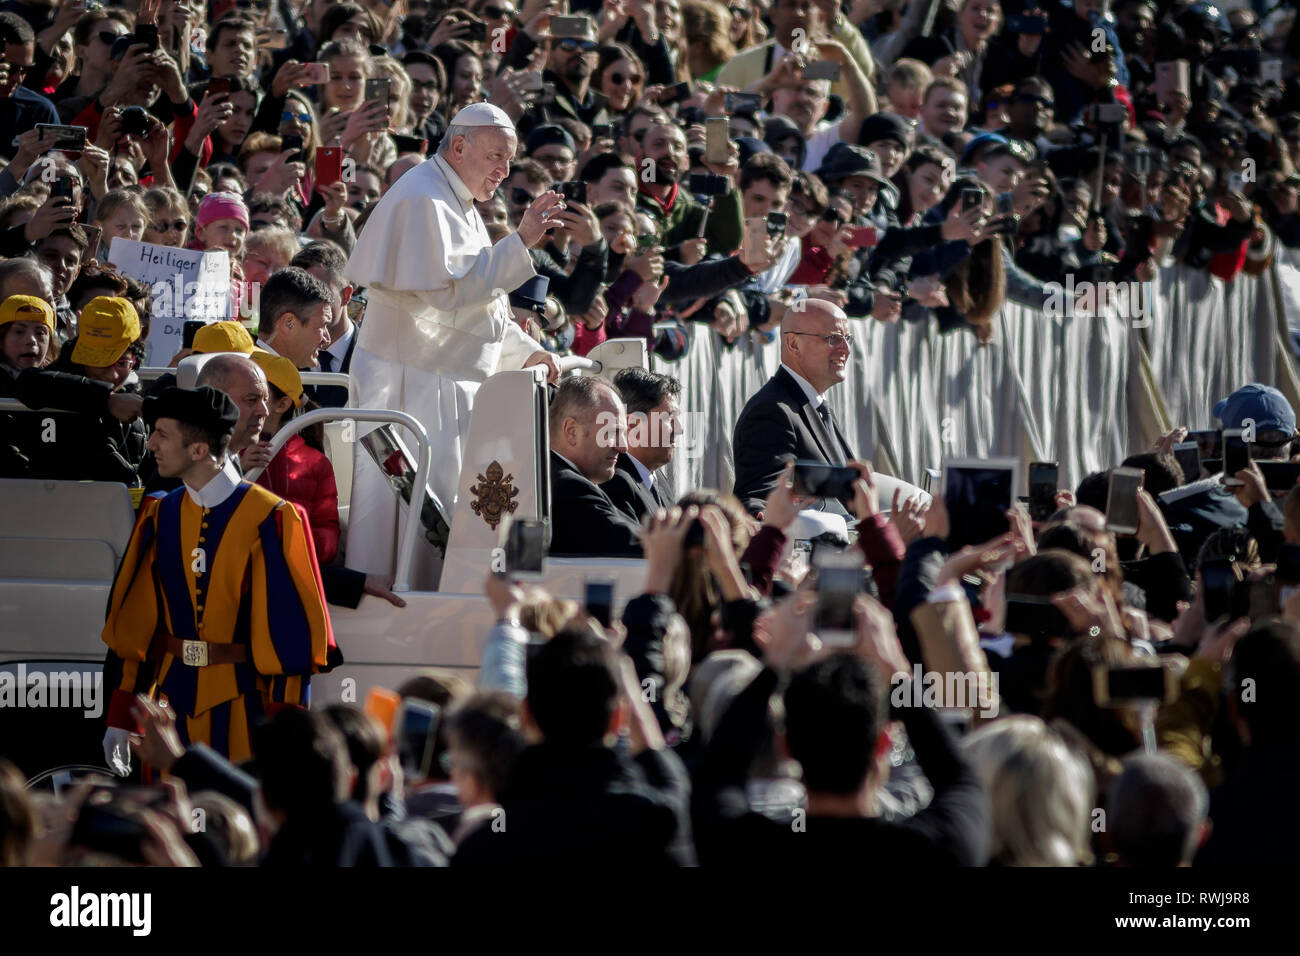 Pope Francis seen riding on the Pope-mobile through the crowd of the  faithful as he arrives to lead the weekly General Audience at St. Peter's  Square. The General Audience is held every